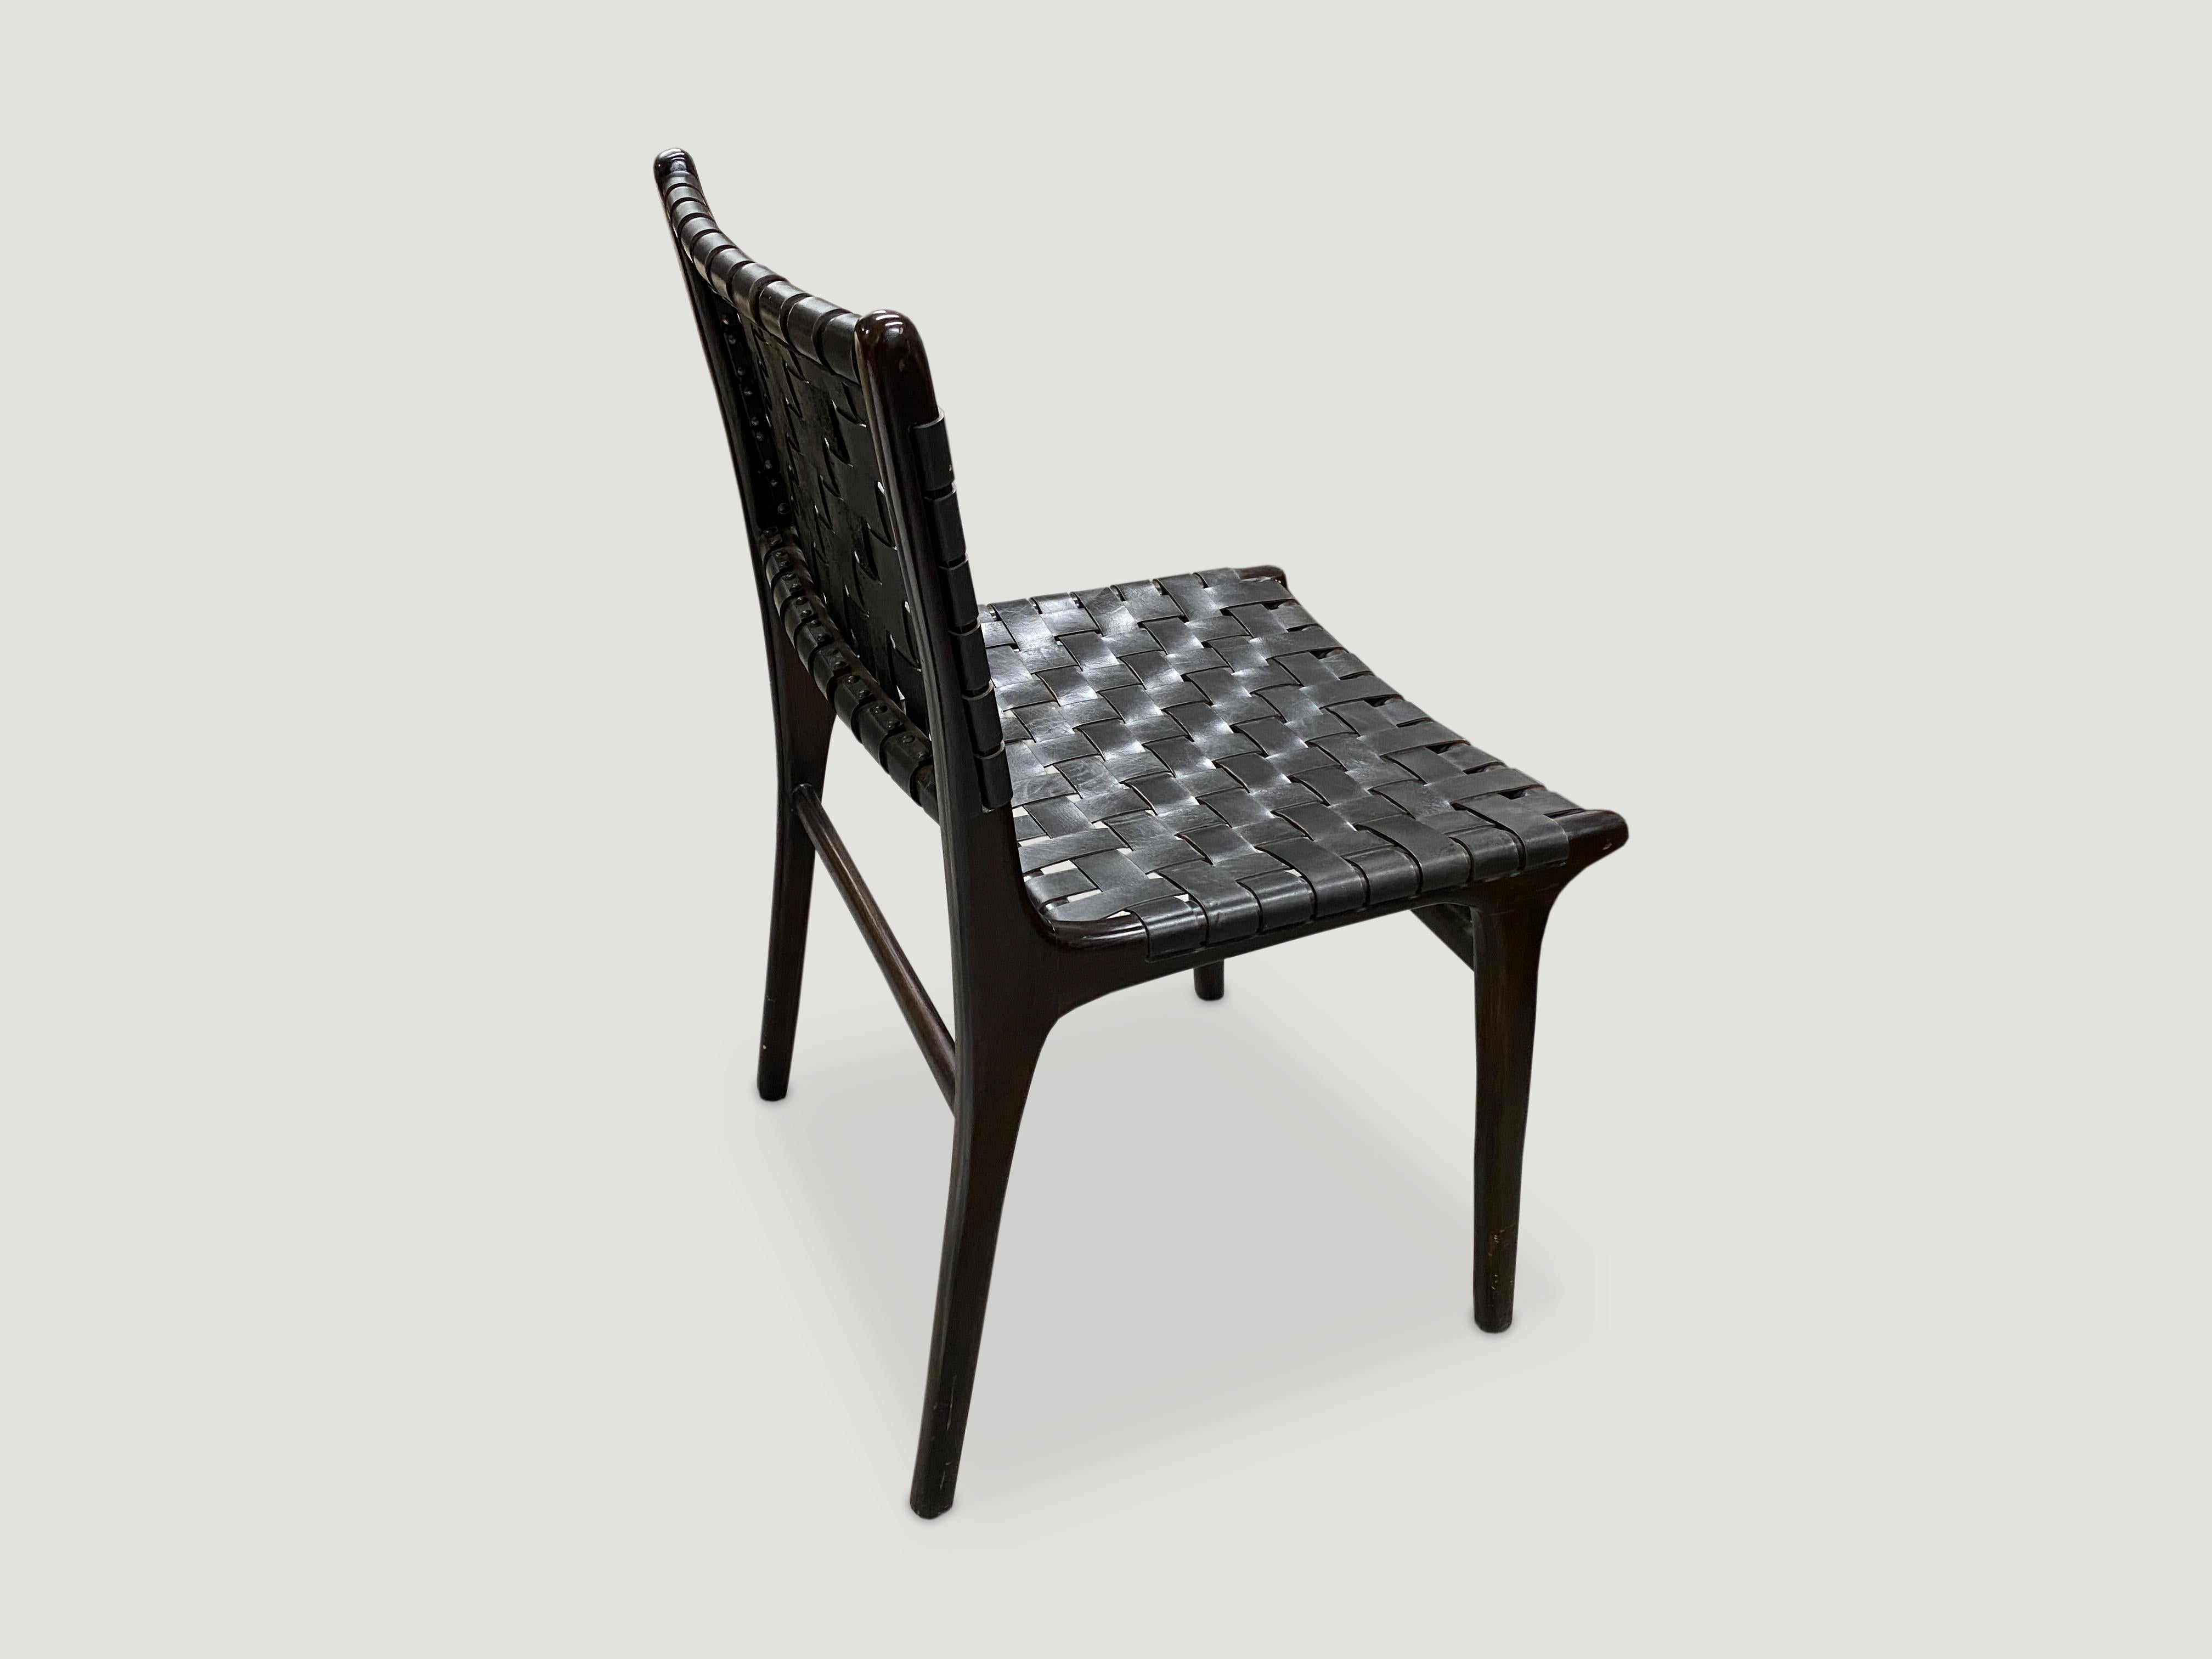 Organic Modern Andrianna Shamaris Modern Chair Series Single Backed Leather Woven Chair For Sale